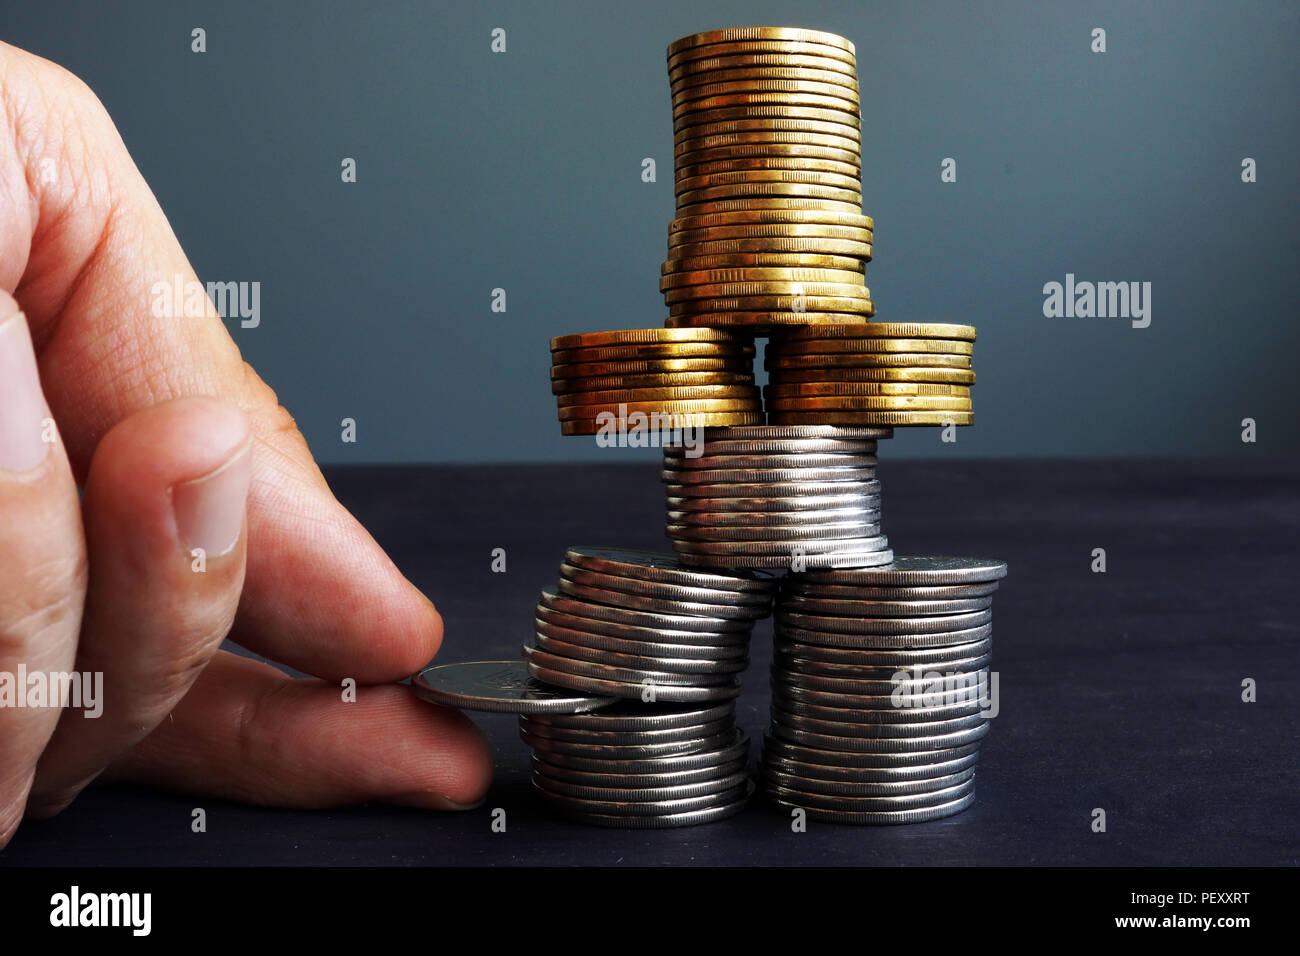 Financial Stability concept. Man holding coin in the coins stack. Stock Photo